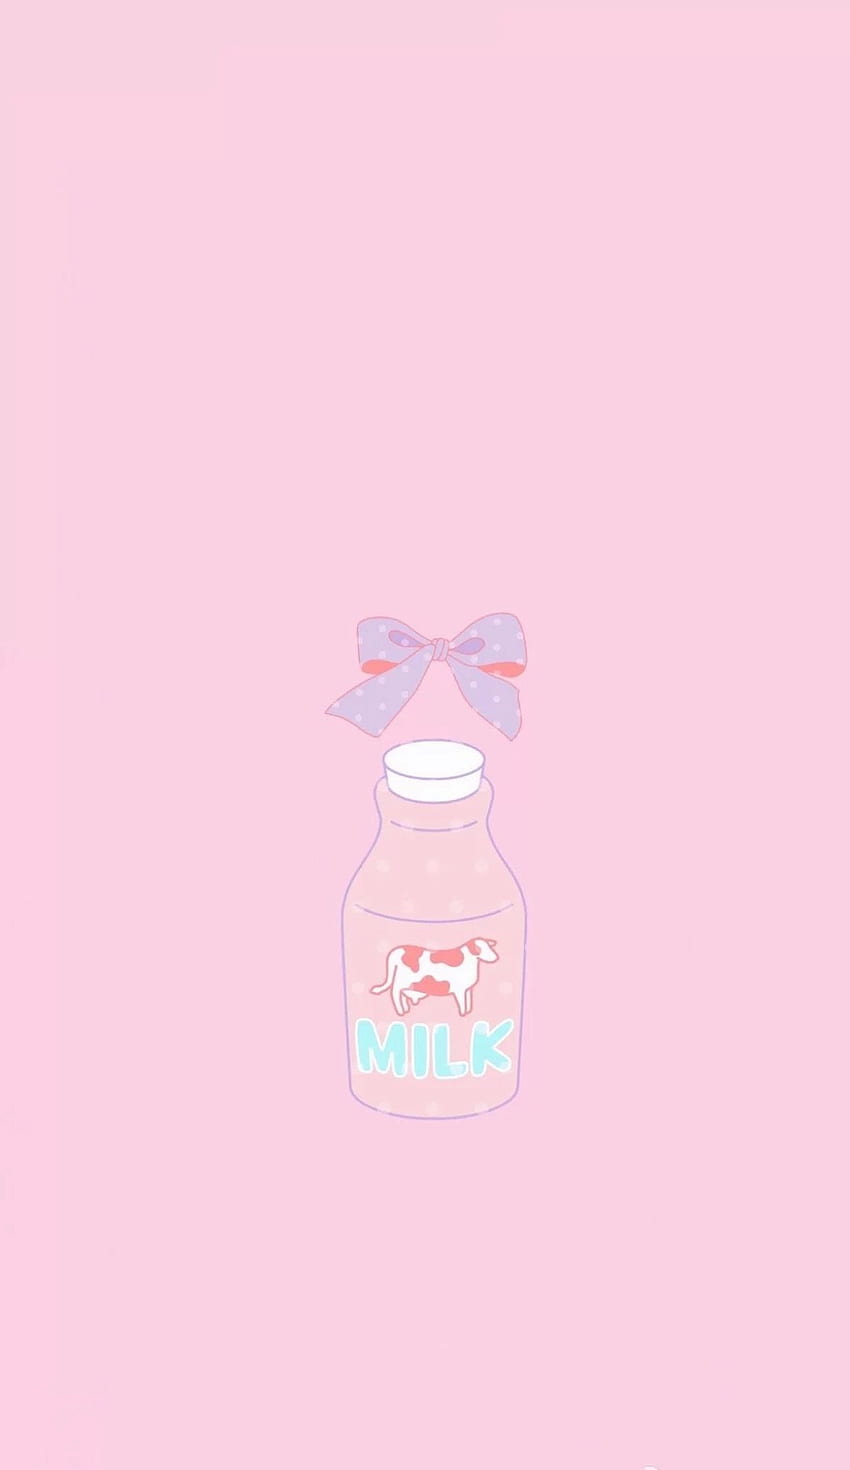 Details More Than 82 Aesthetic Melanie Martinez Wallpapers Best In